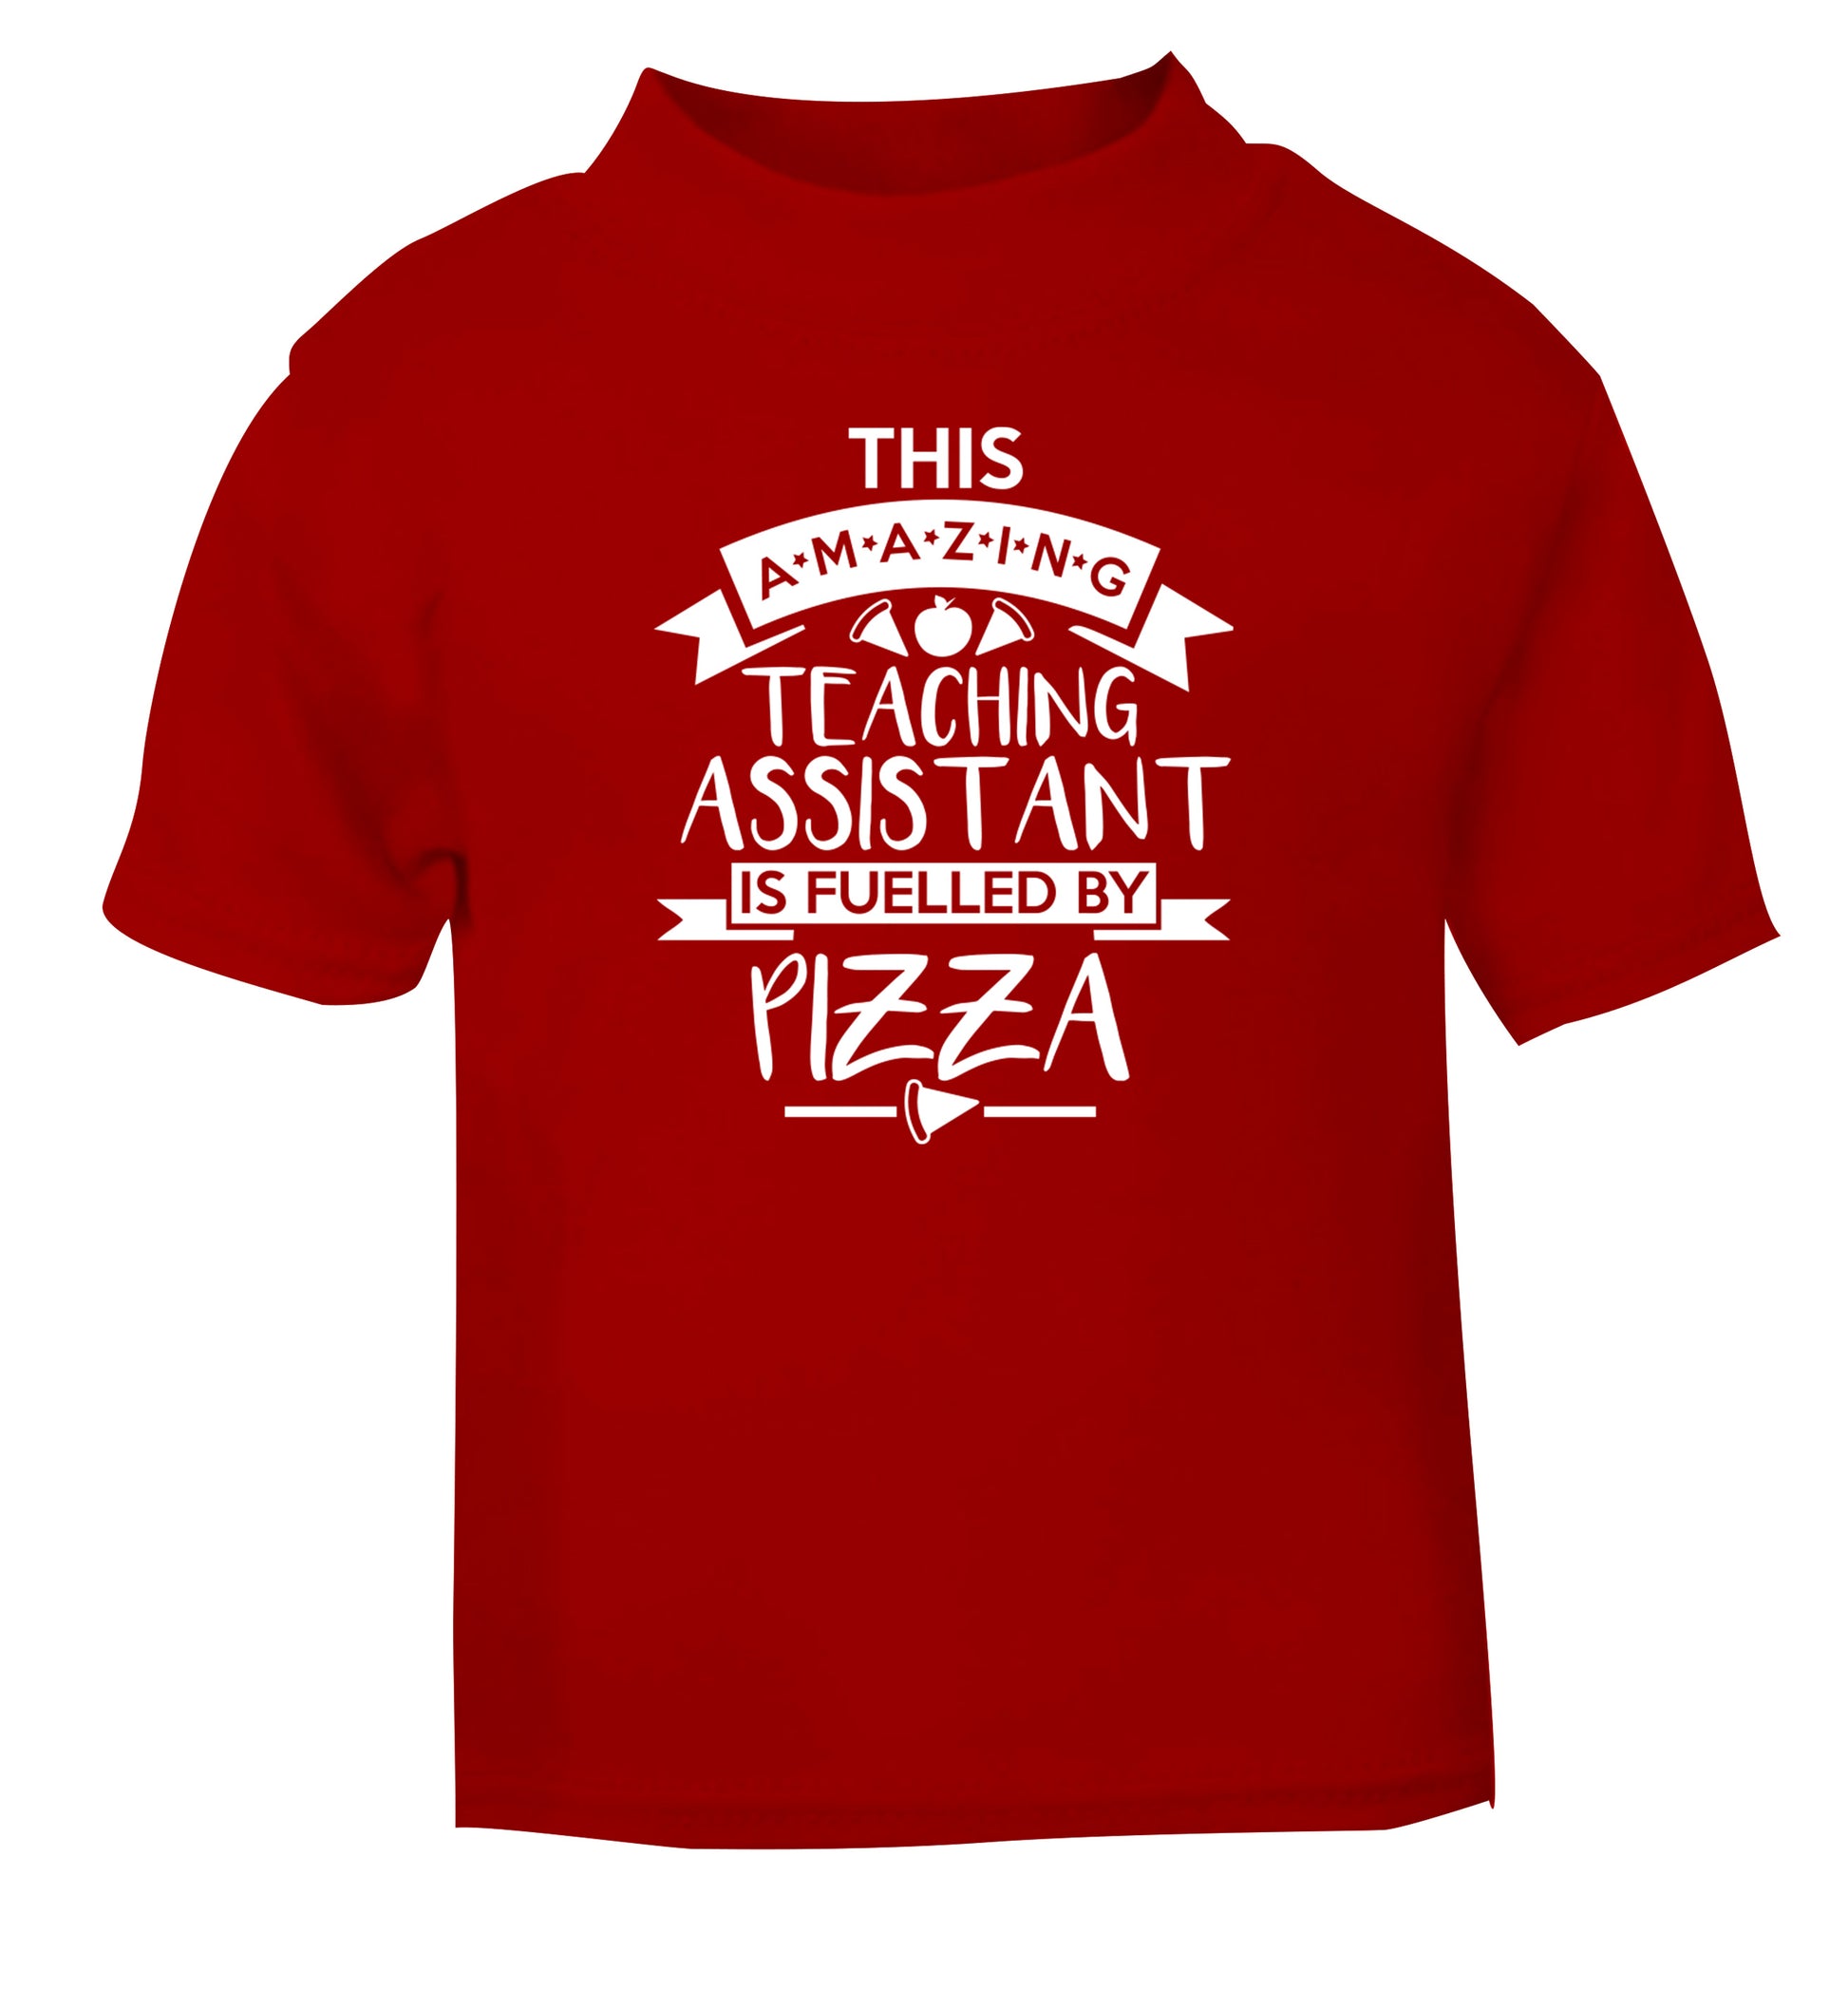 This amazing teaching assistant is fuelled by pizza red Baby Toddler Tshirt 2 Years